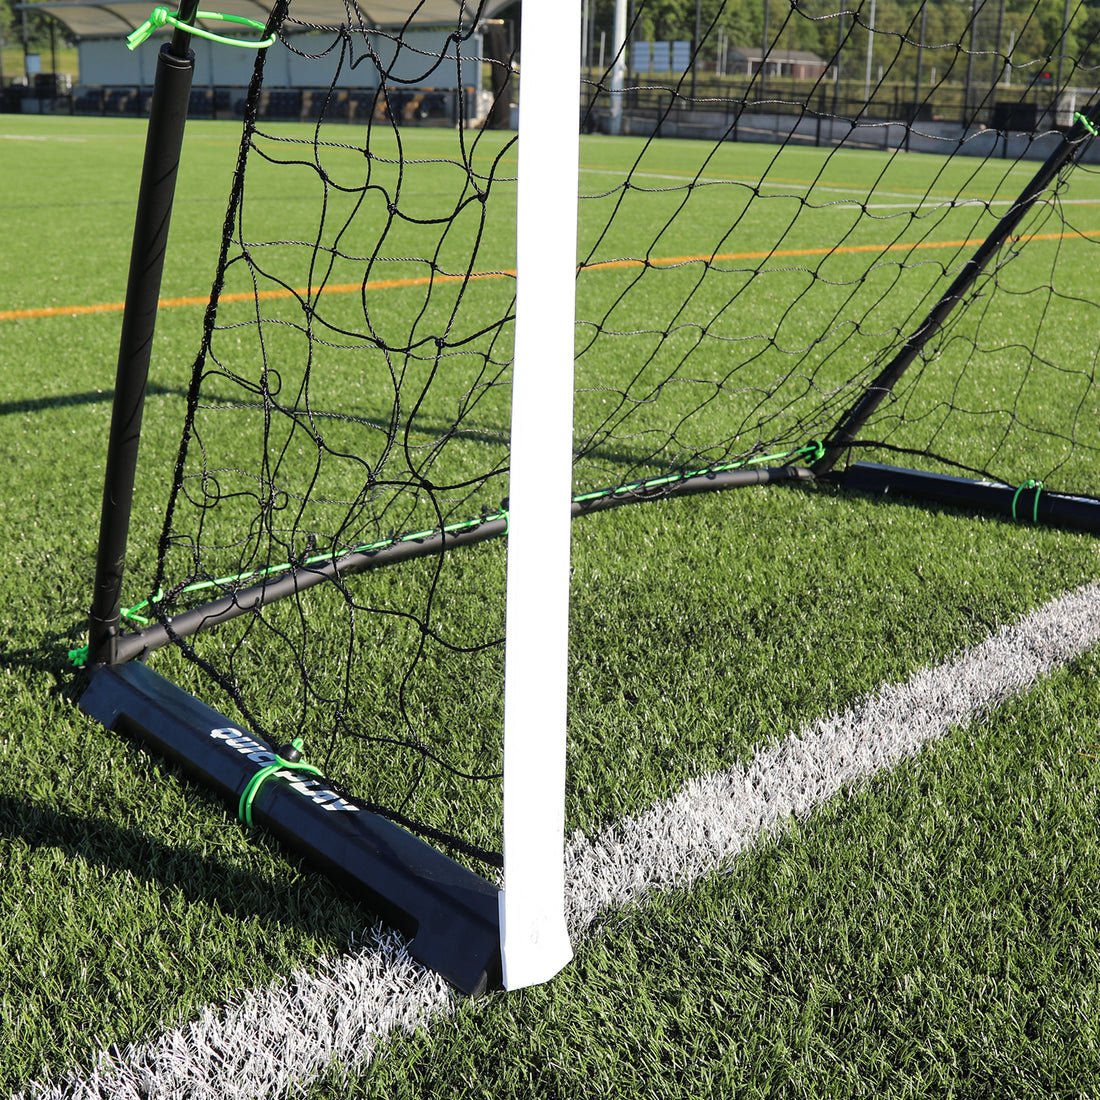 KICKSTER Base Weight (Set of 2) Small Goal Sizes: 5x3' > 8x5' - Works with goals purchased after Apr '23